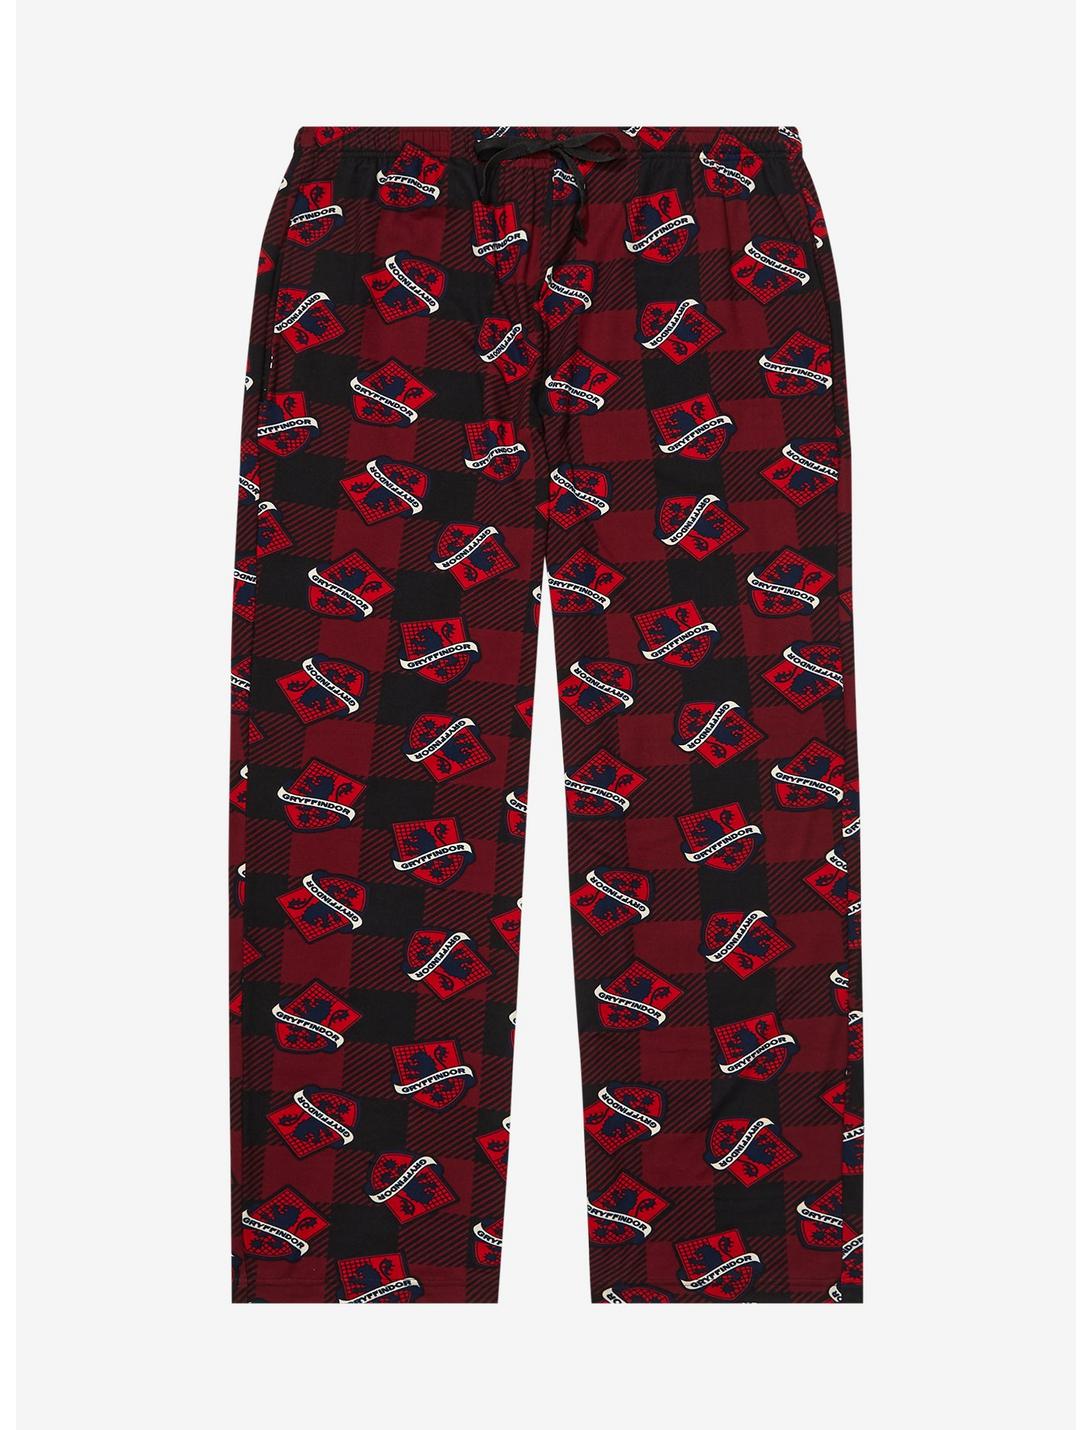 Harry Potter Plaid Gryffindor Allover Print Plus Size Sleep Pants - BoxLunch Exclusive, RED, hi-res